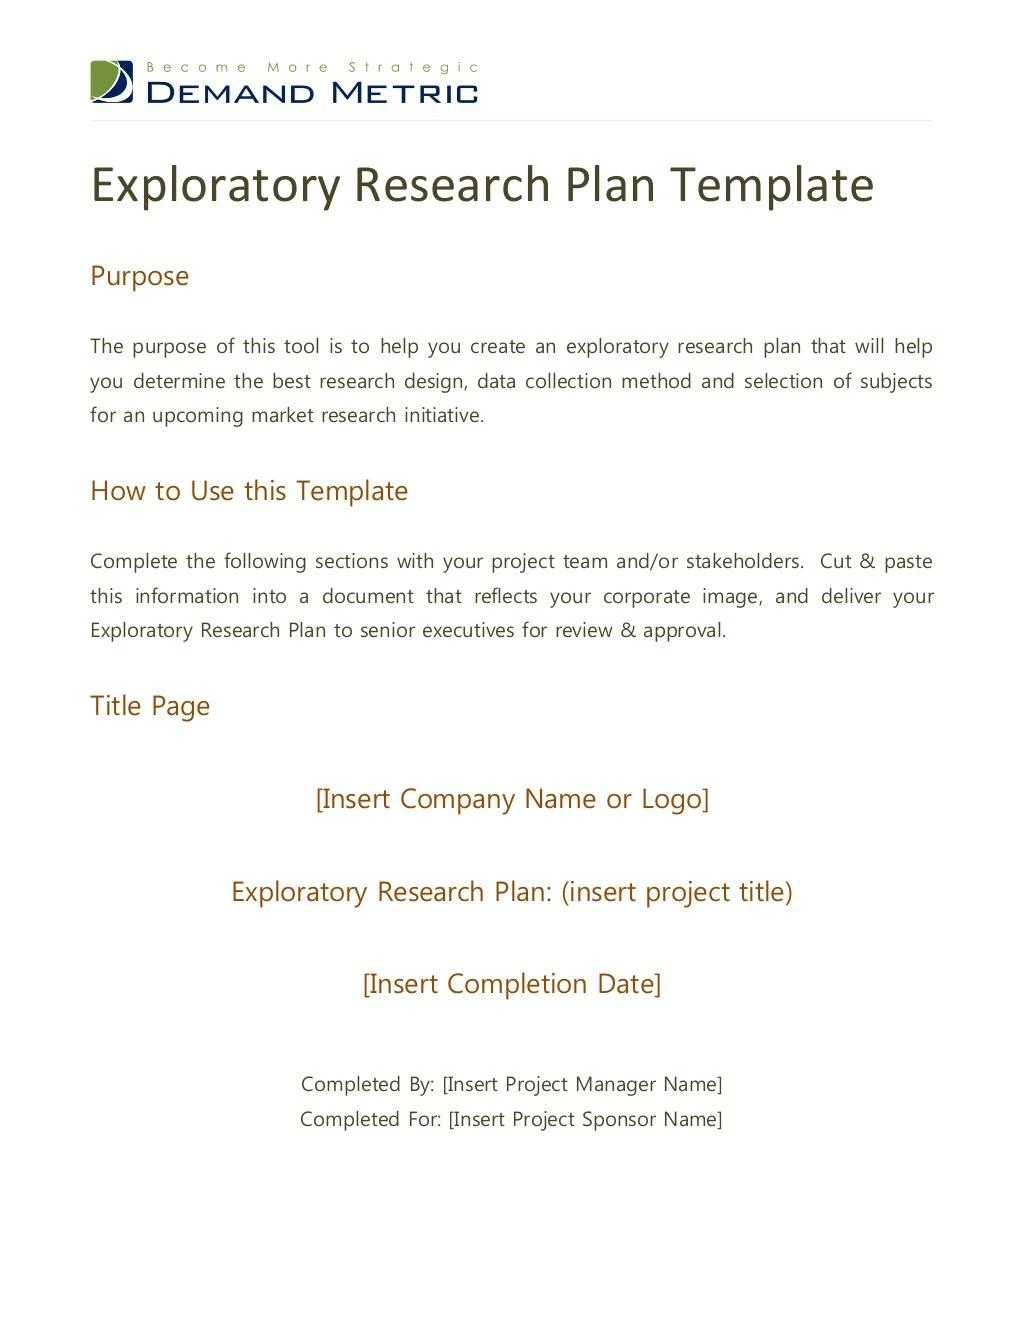 exploratory research plan template